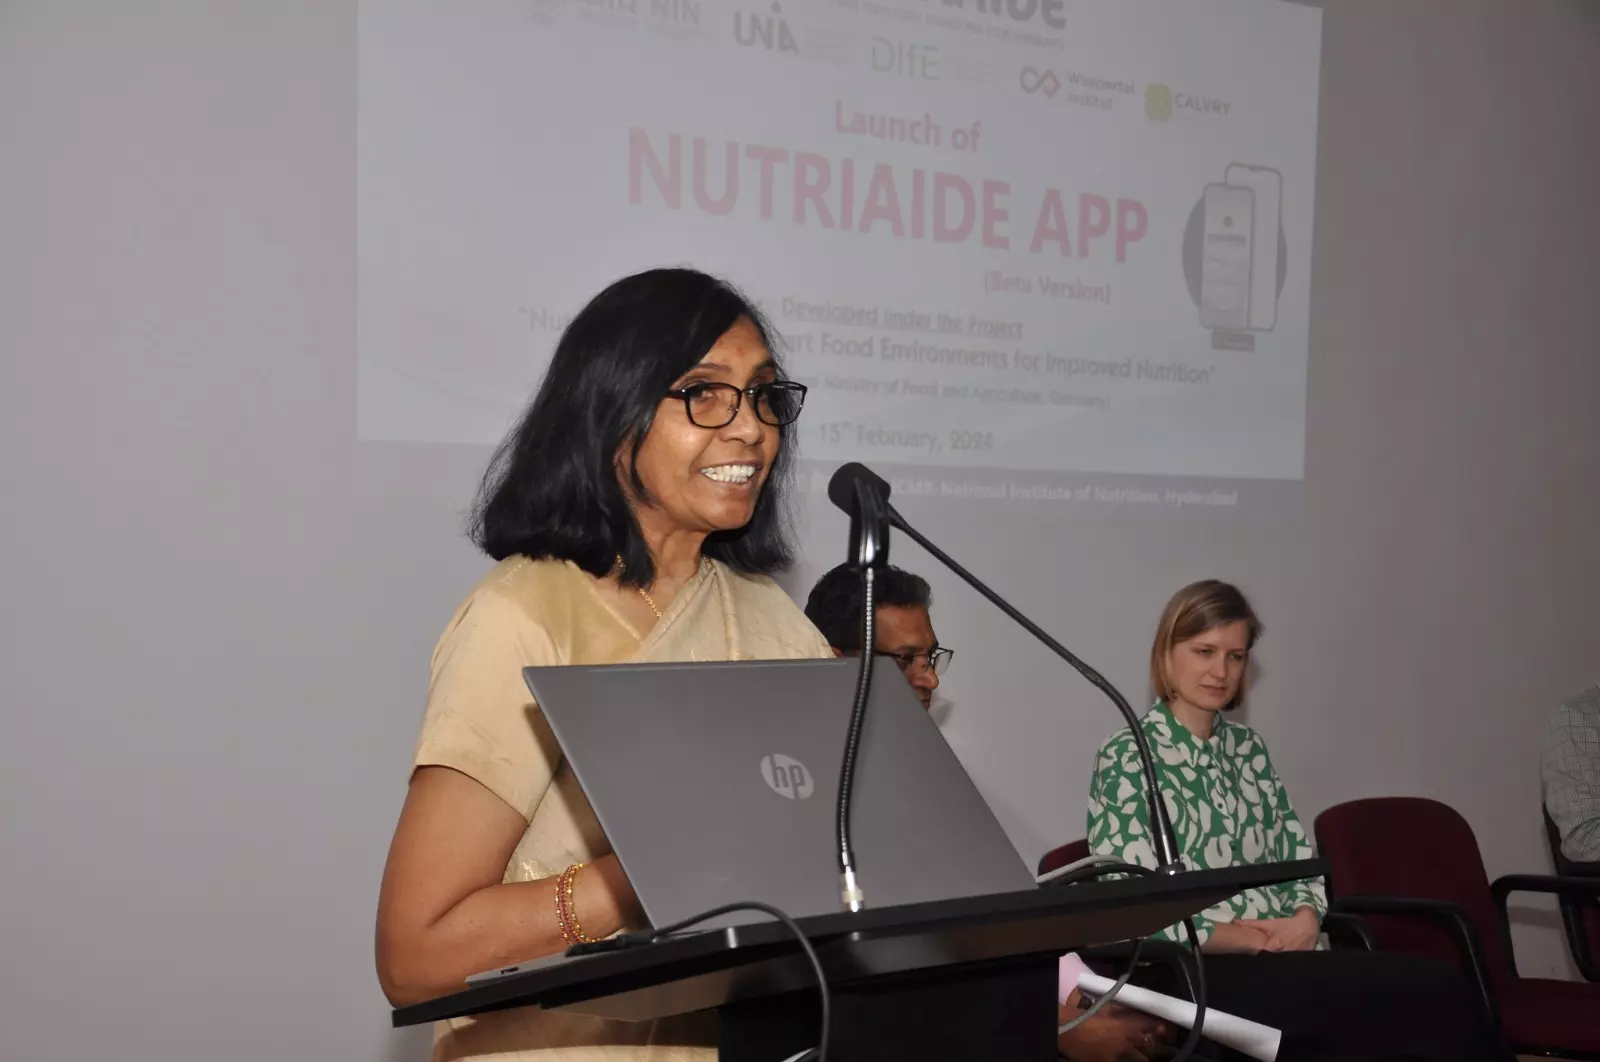 NutriAIDE: App Empowering Informed Food Choices